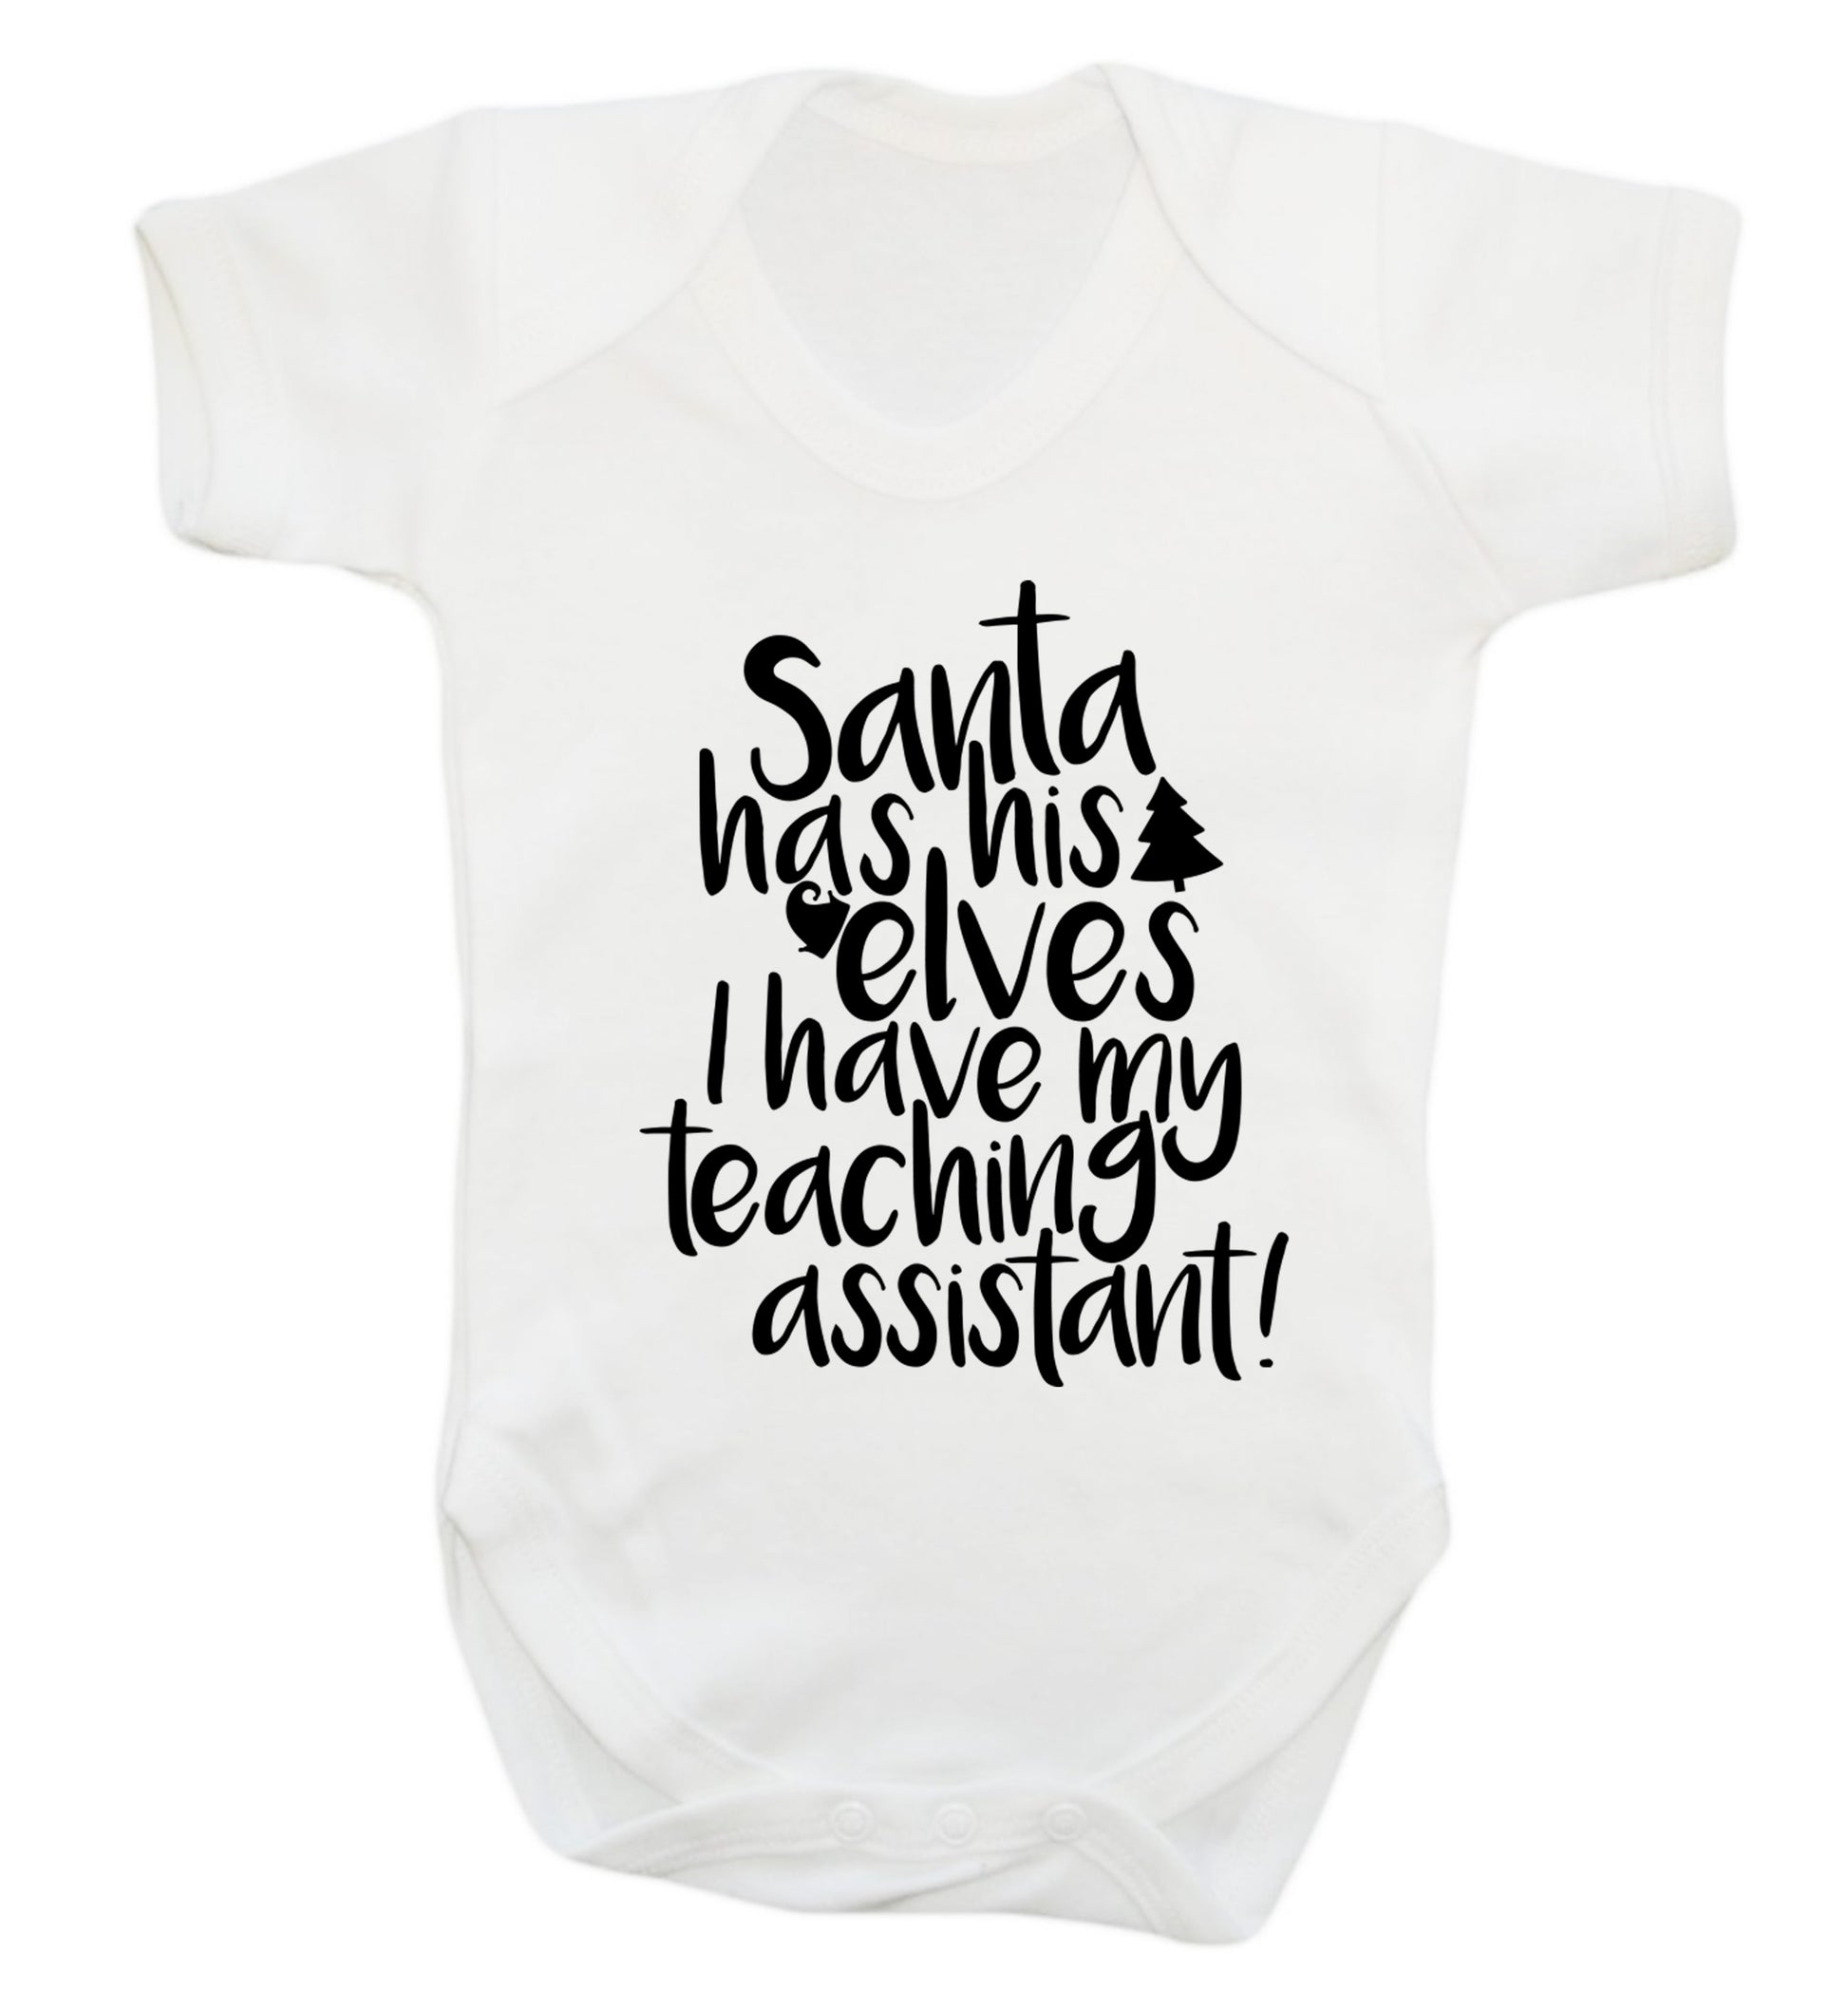 Santa has his elves I have my teaching assistant Baby Vest white 18-24 months